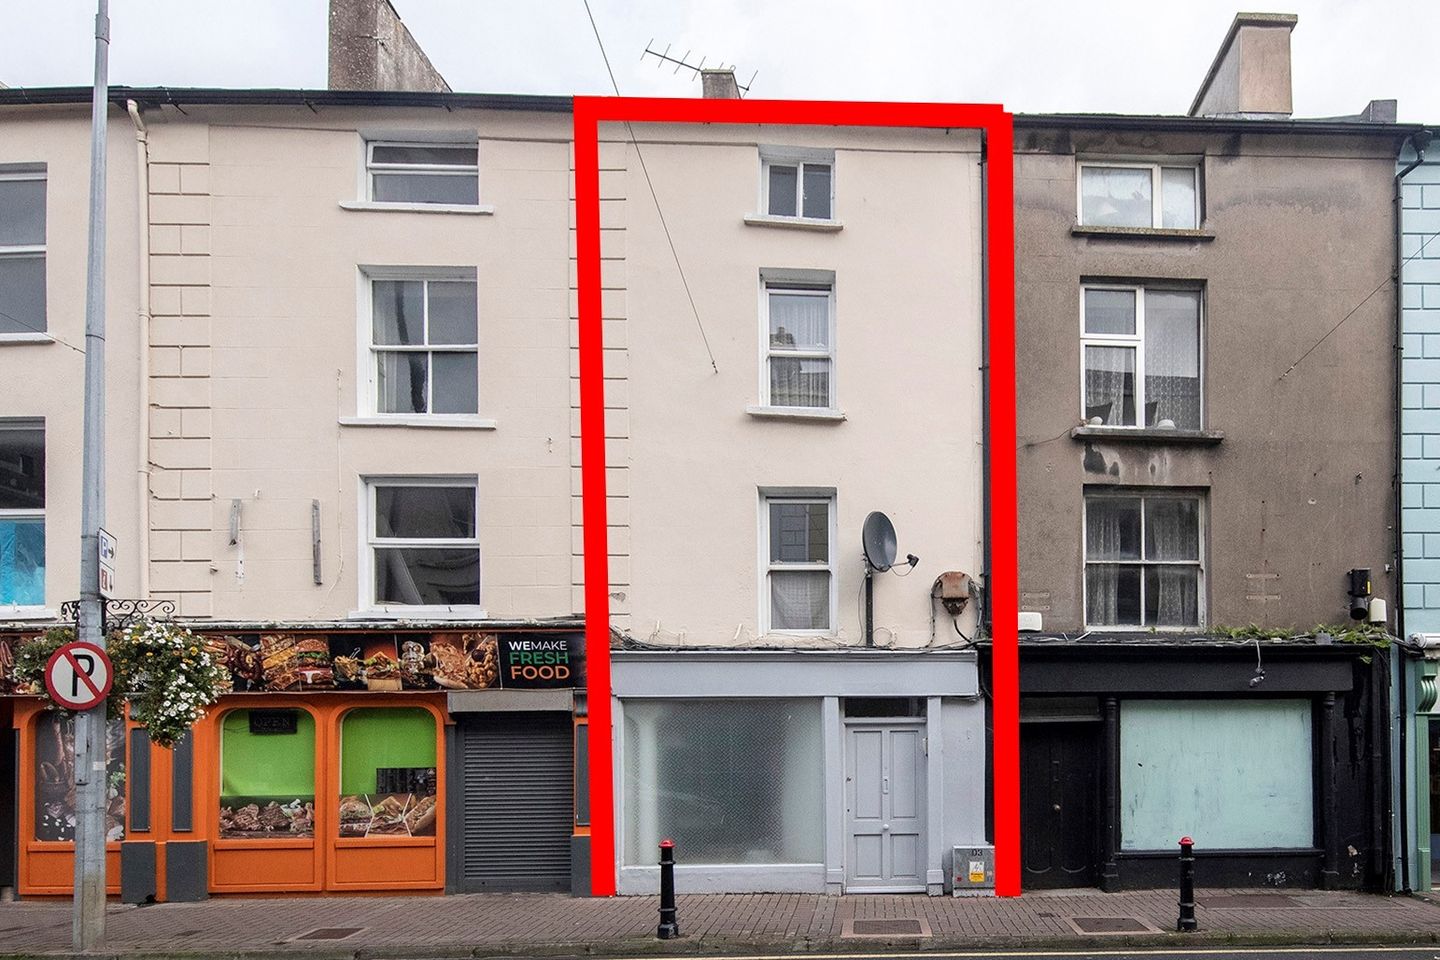 56 Parnell Street, Dungarvan, Co. Waterford, X35HX75